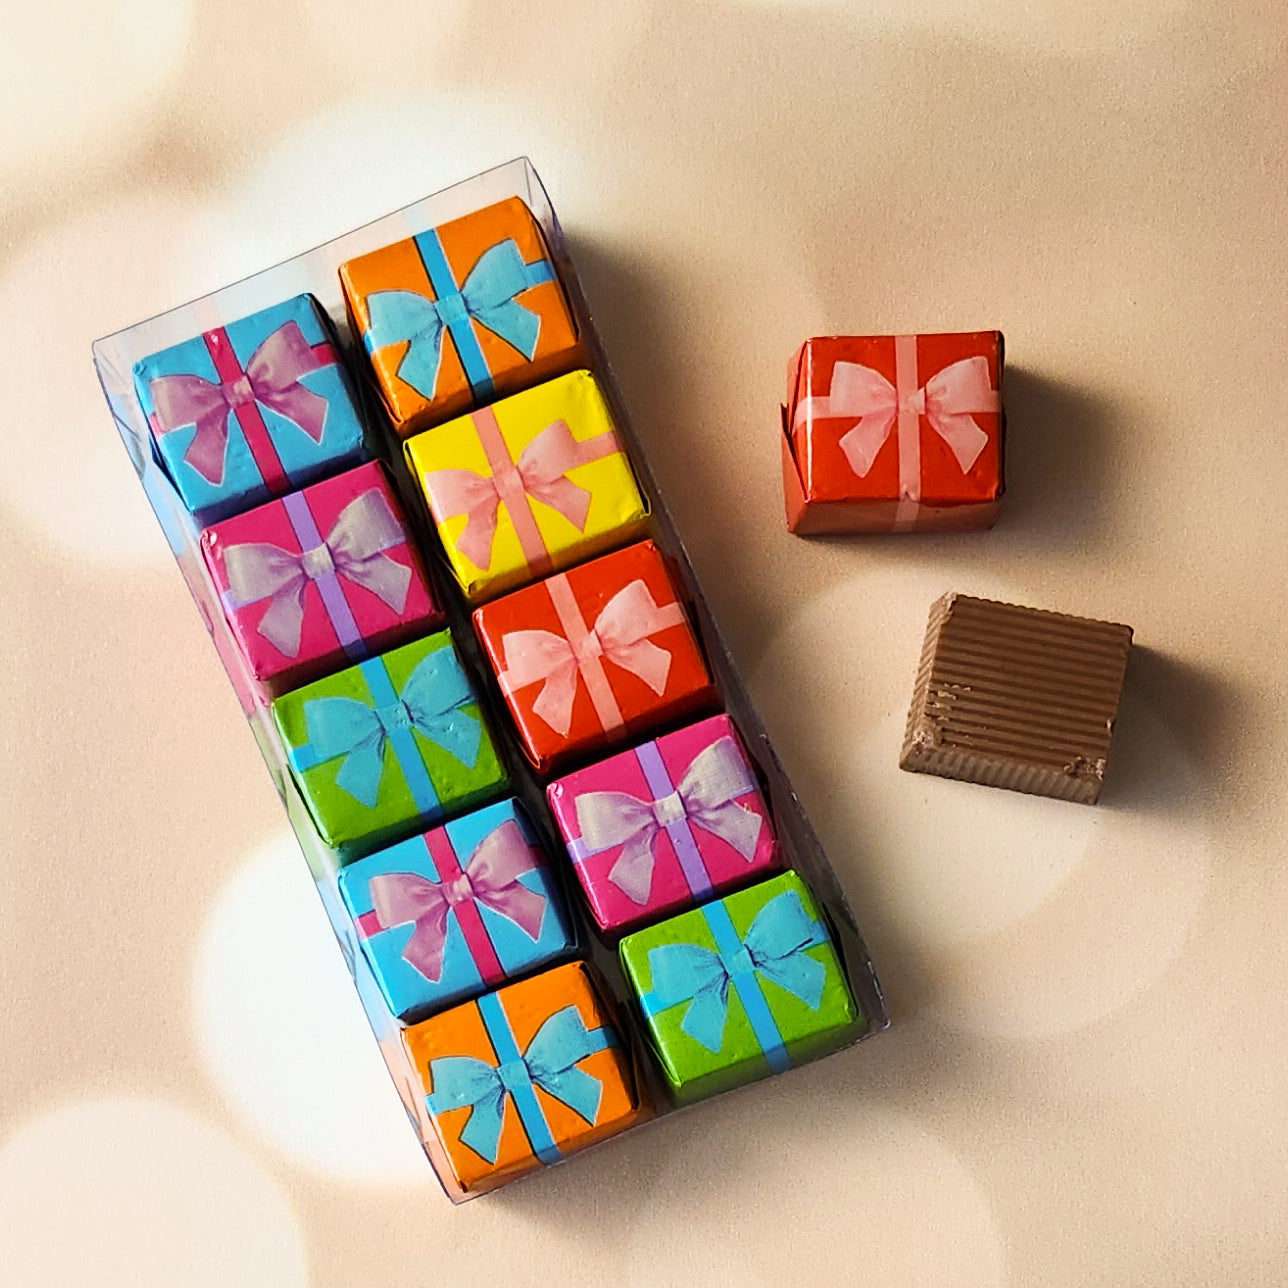 10 Bite sized milk chocolate pieces are wrapped in decorative foil to look like little gifts. Packed in a clear box.